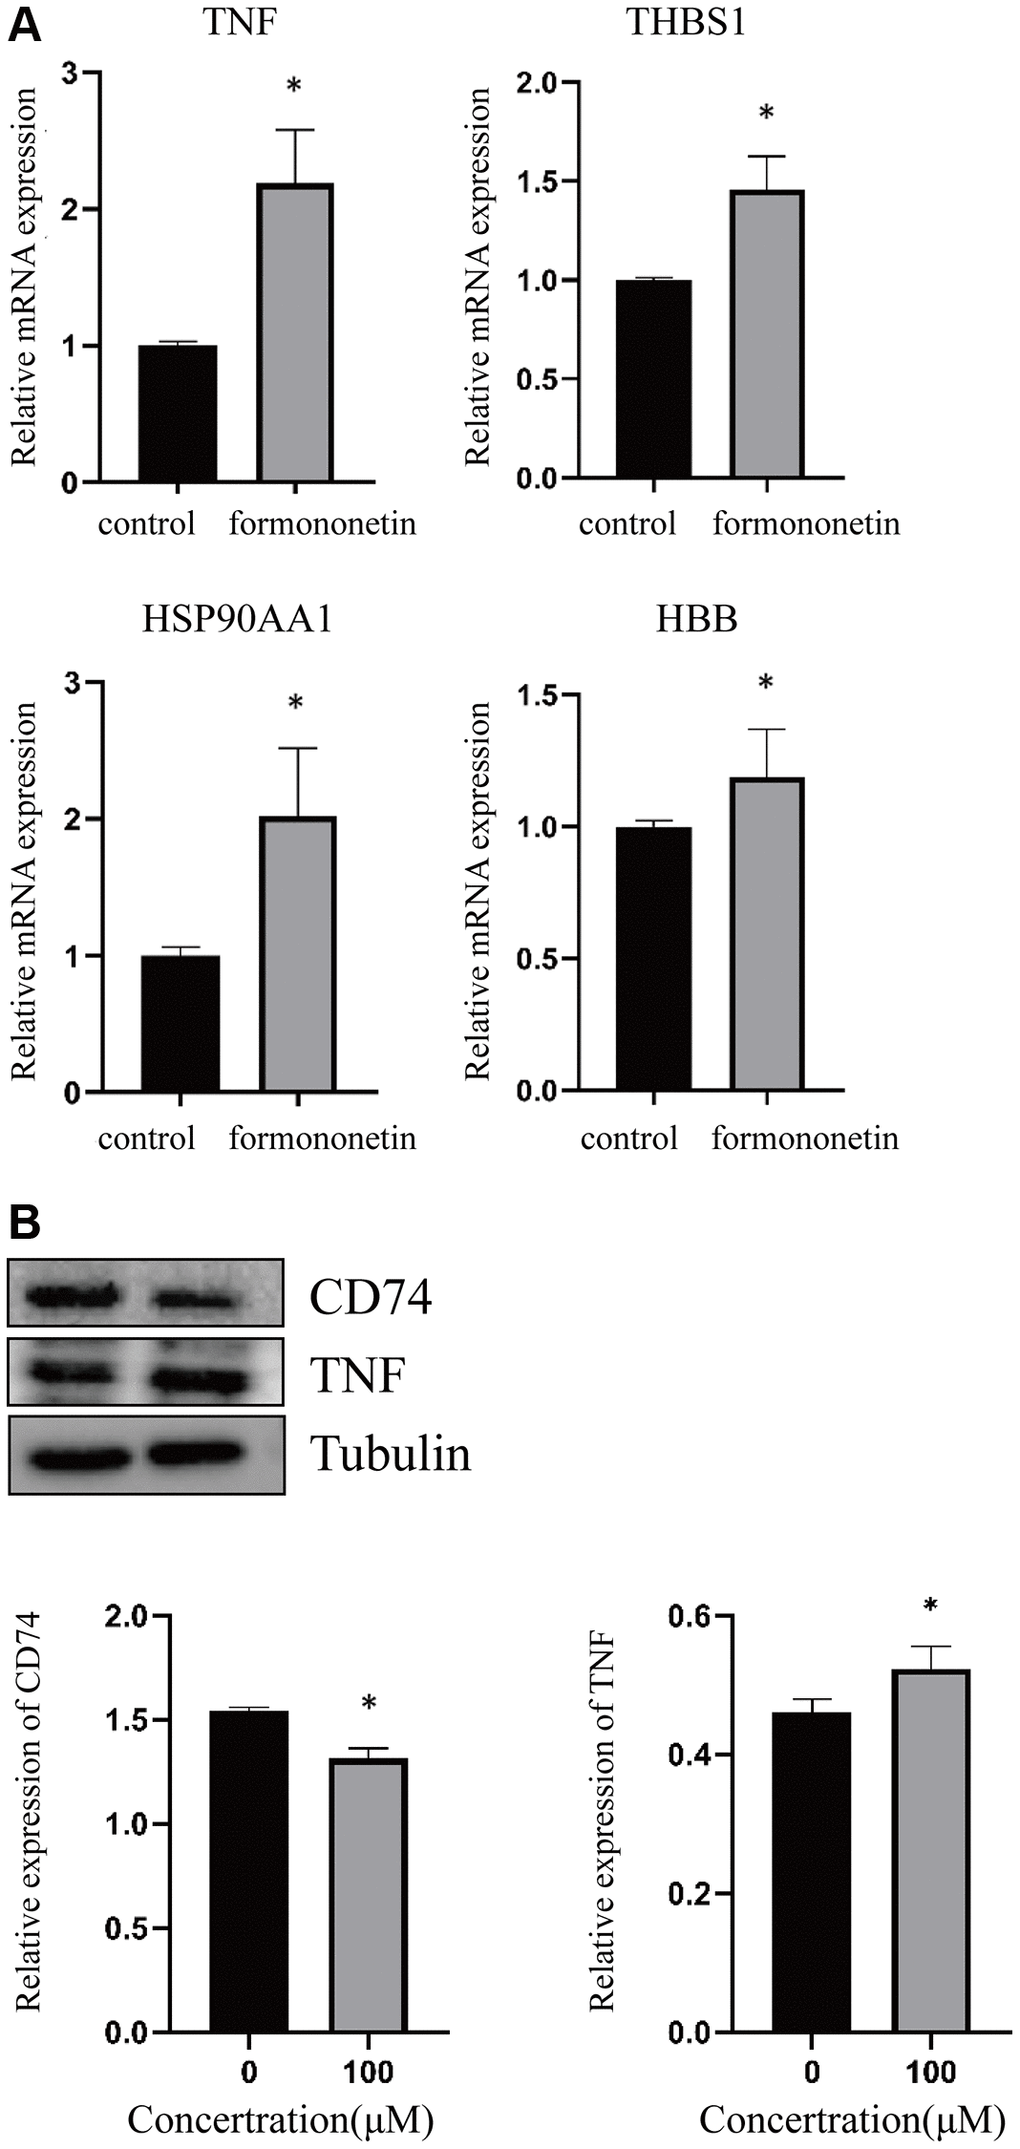 Formononetin altered the expression of its targets in prostate cancer cell line. (A) qPCR analysis showed that formononetin induced the expression of mRNA of TNF, THBS1, HSP90AA1, and HBB in prostate cancer cell. (B) Formononetin treatment also induced the protein level of TNF and reduced the protein level of CD74 in prostate cancer cell.